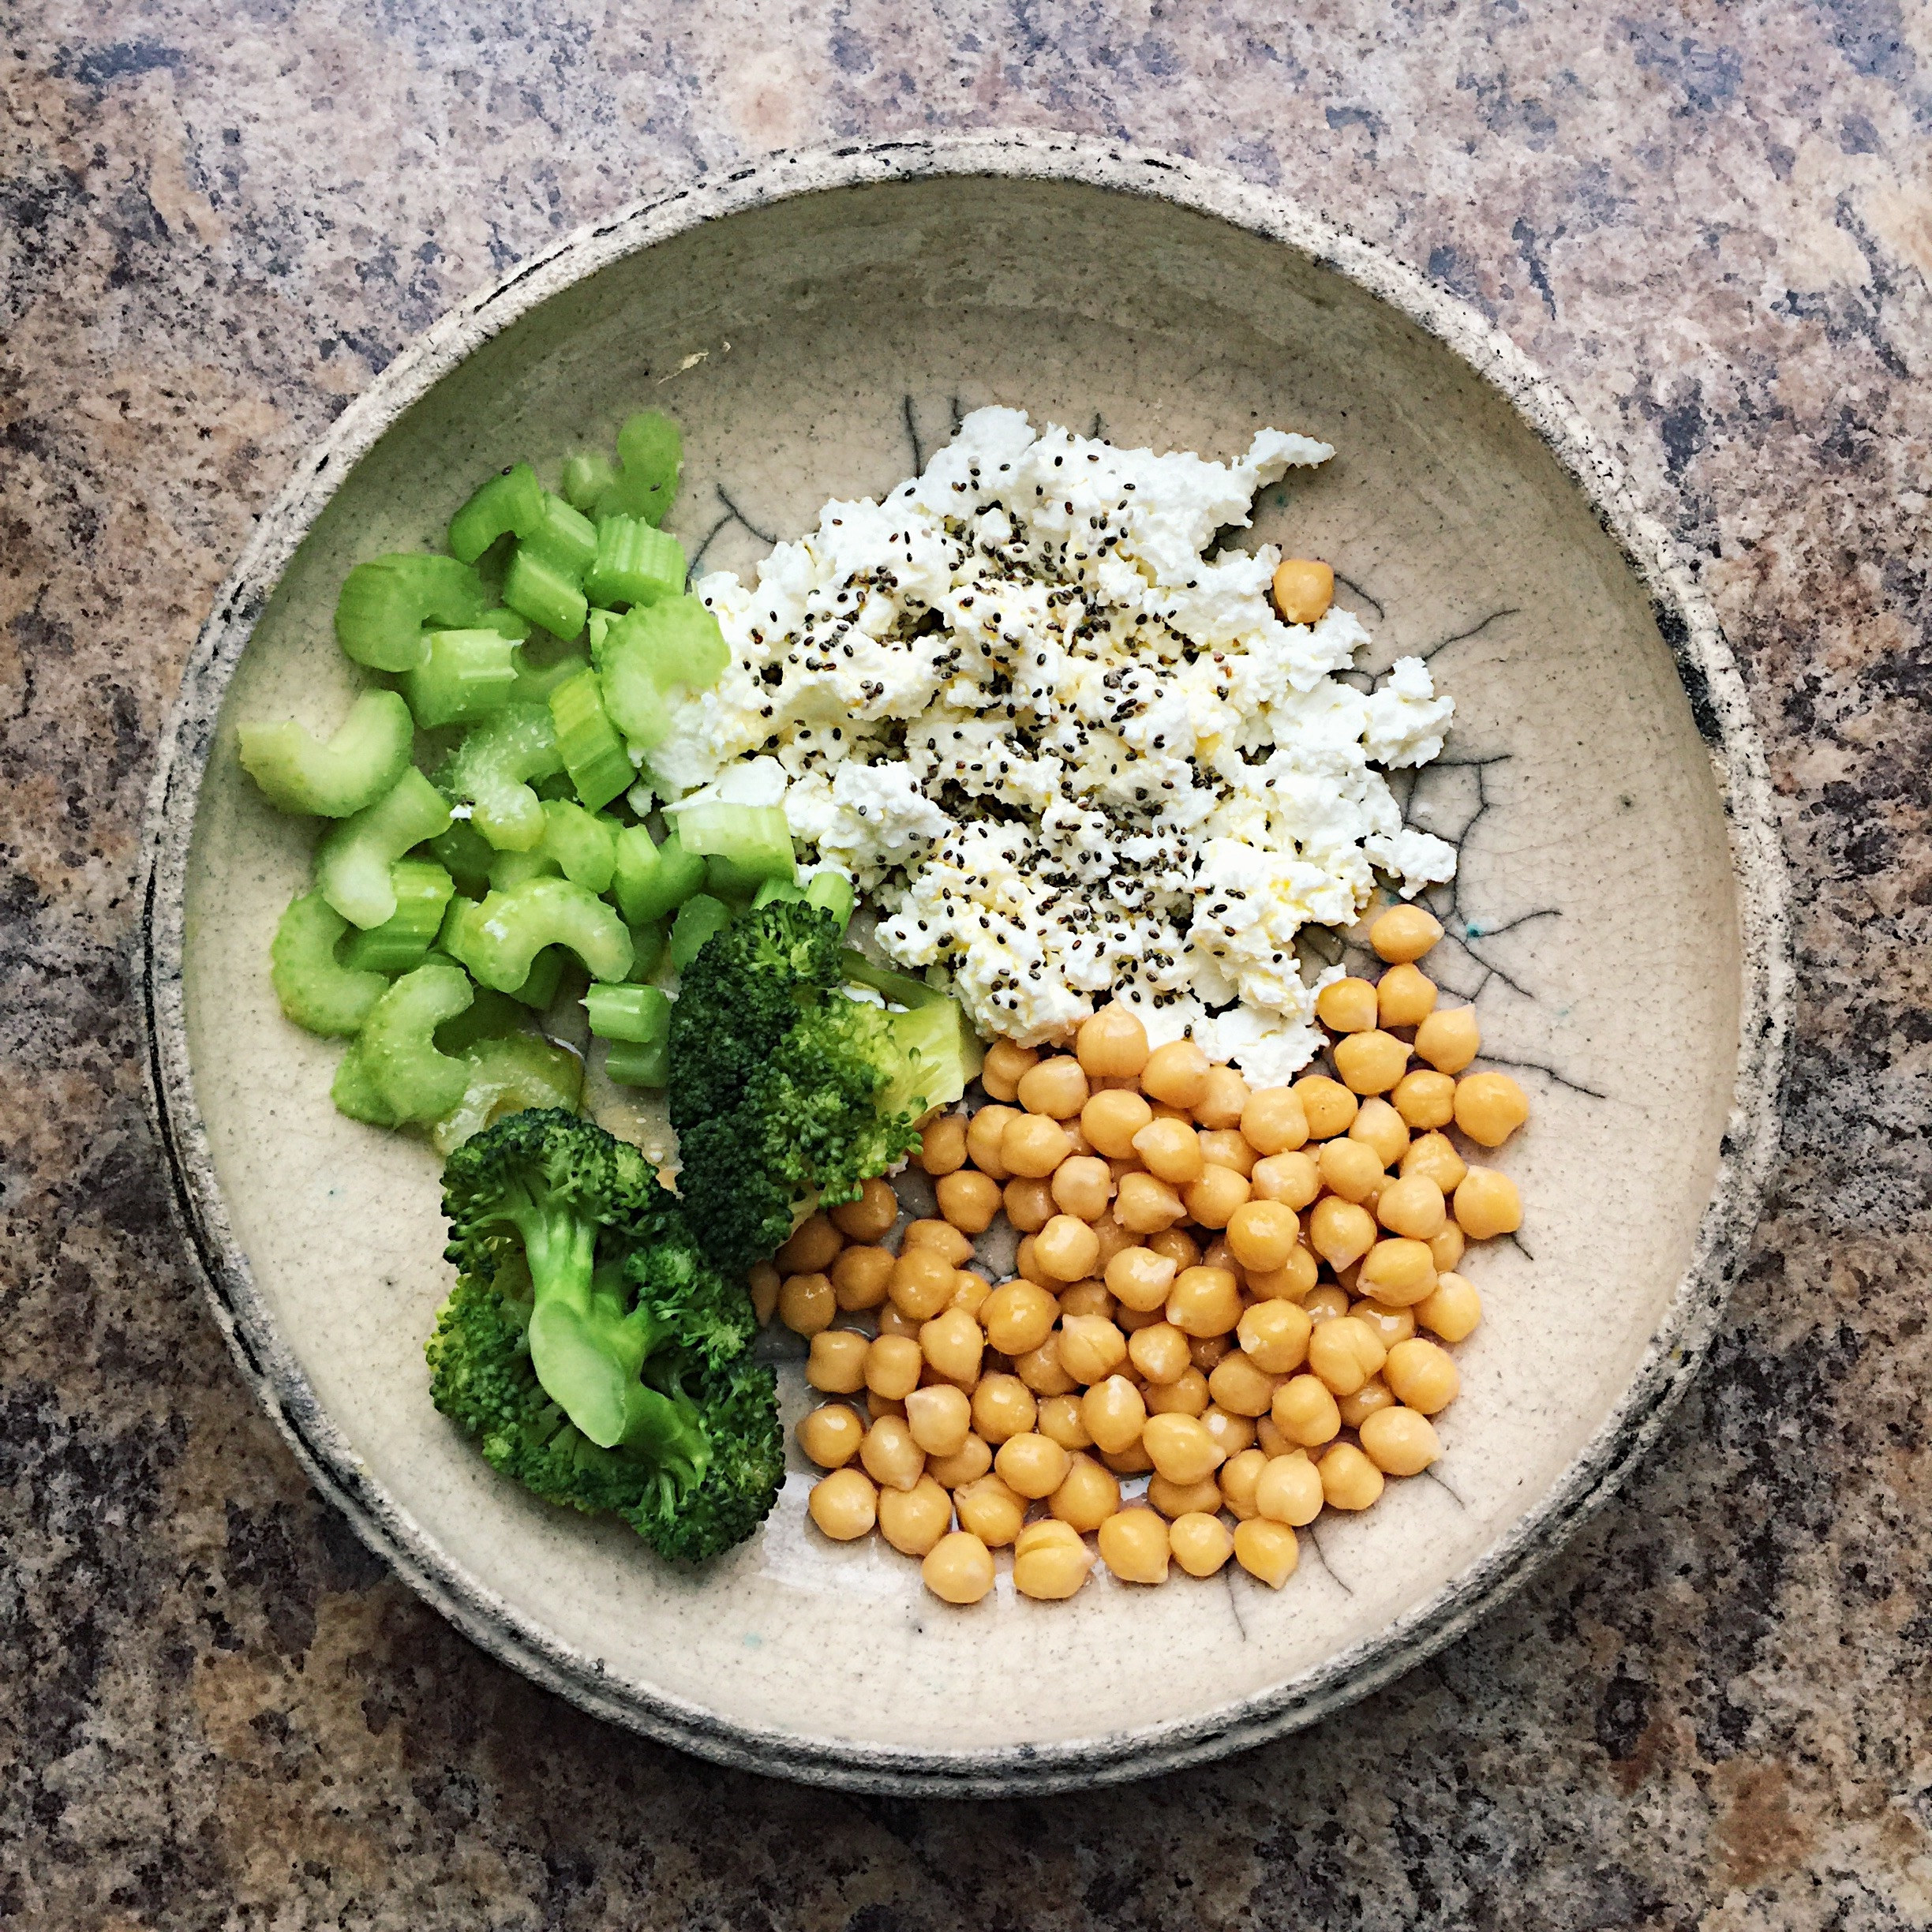 Cottage cheese with broccoli, celery, and chickpeas.